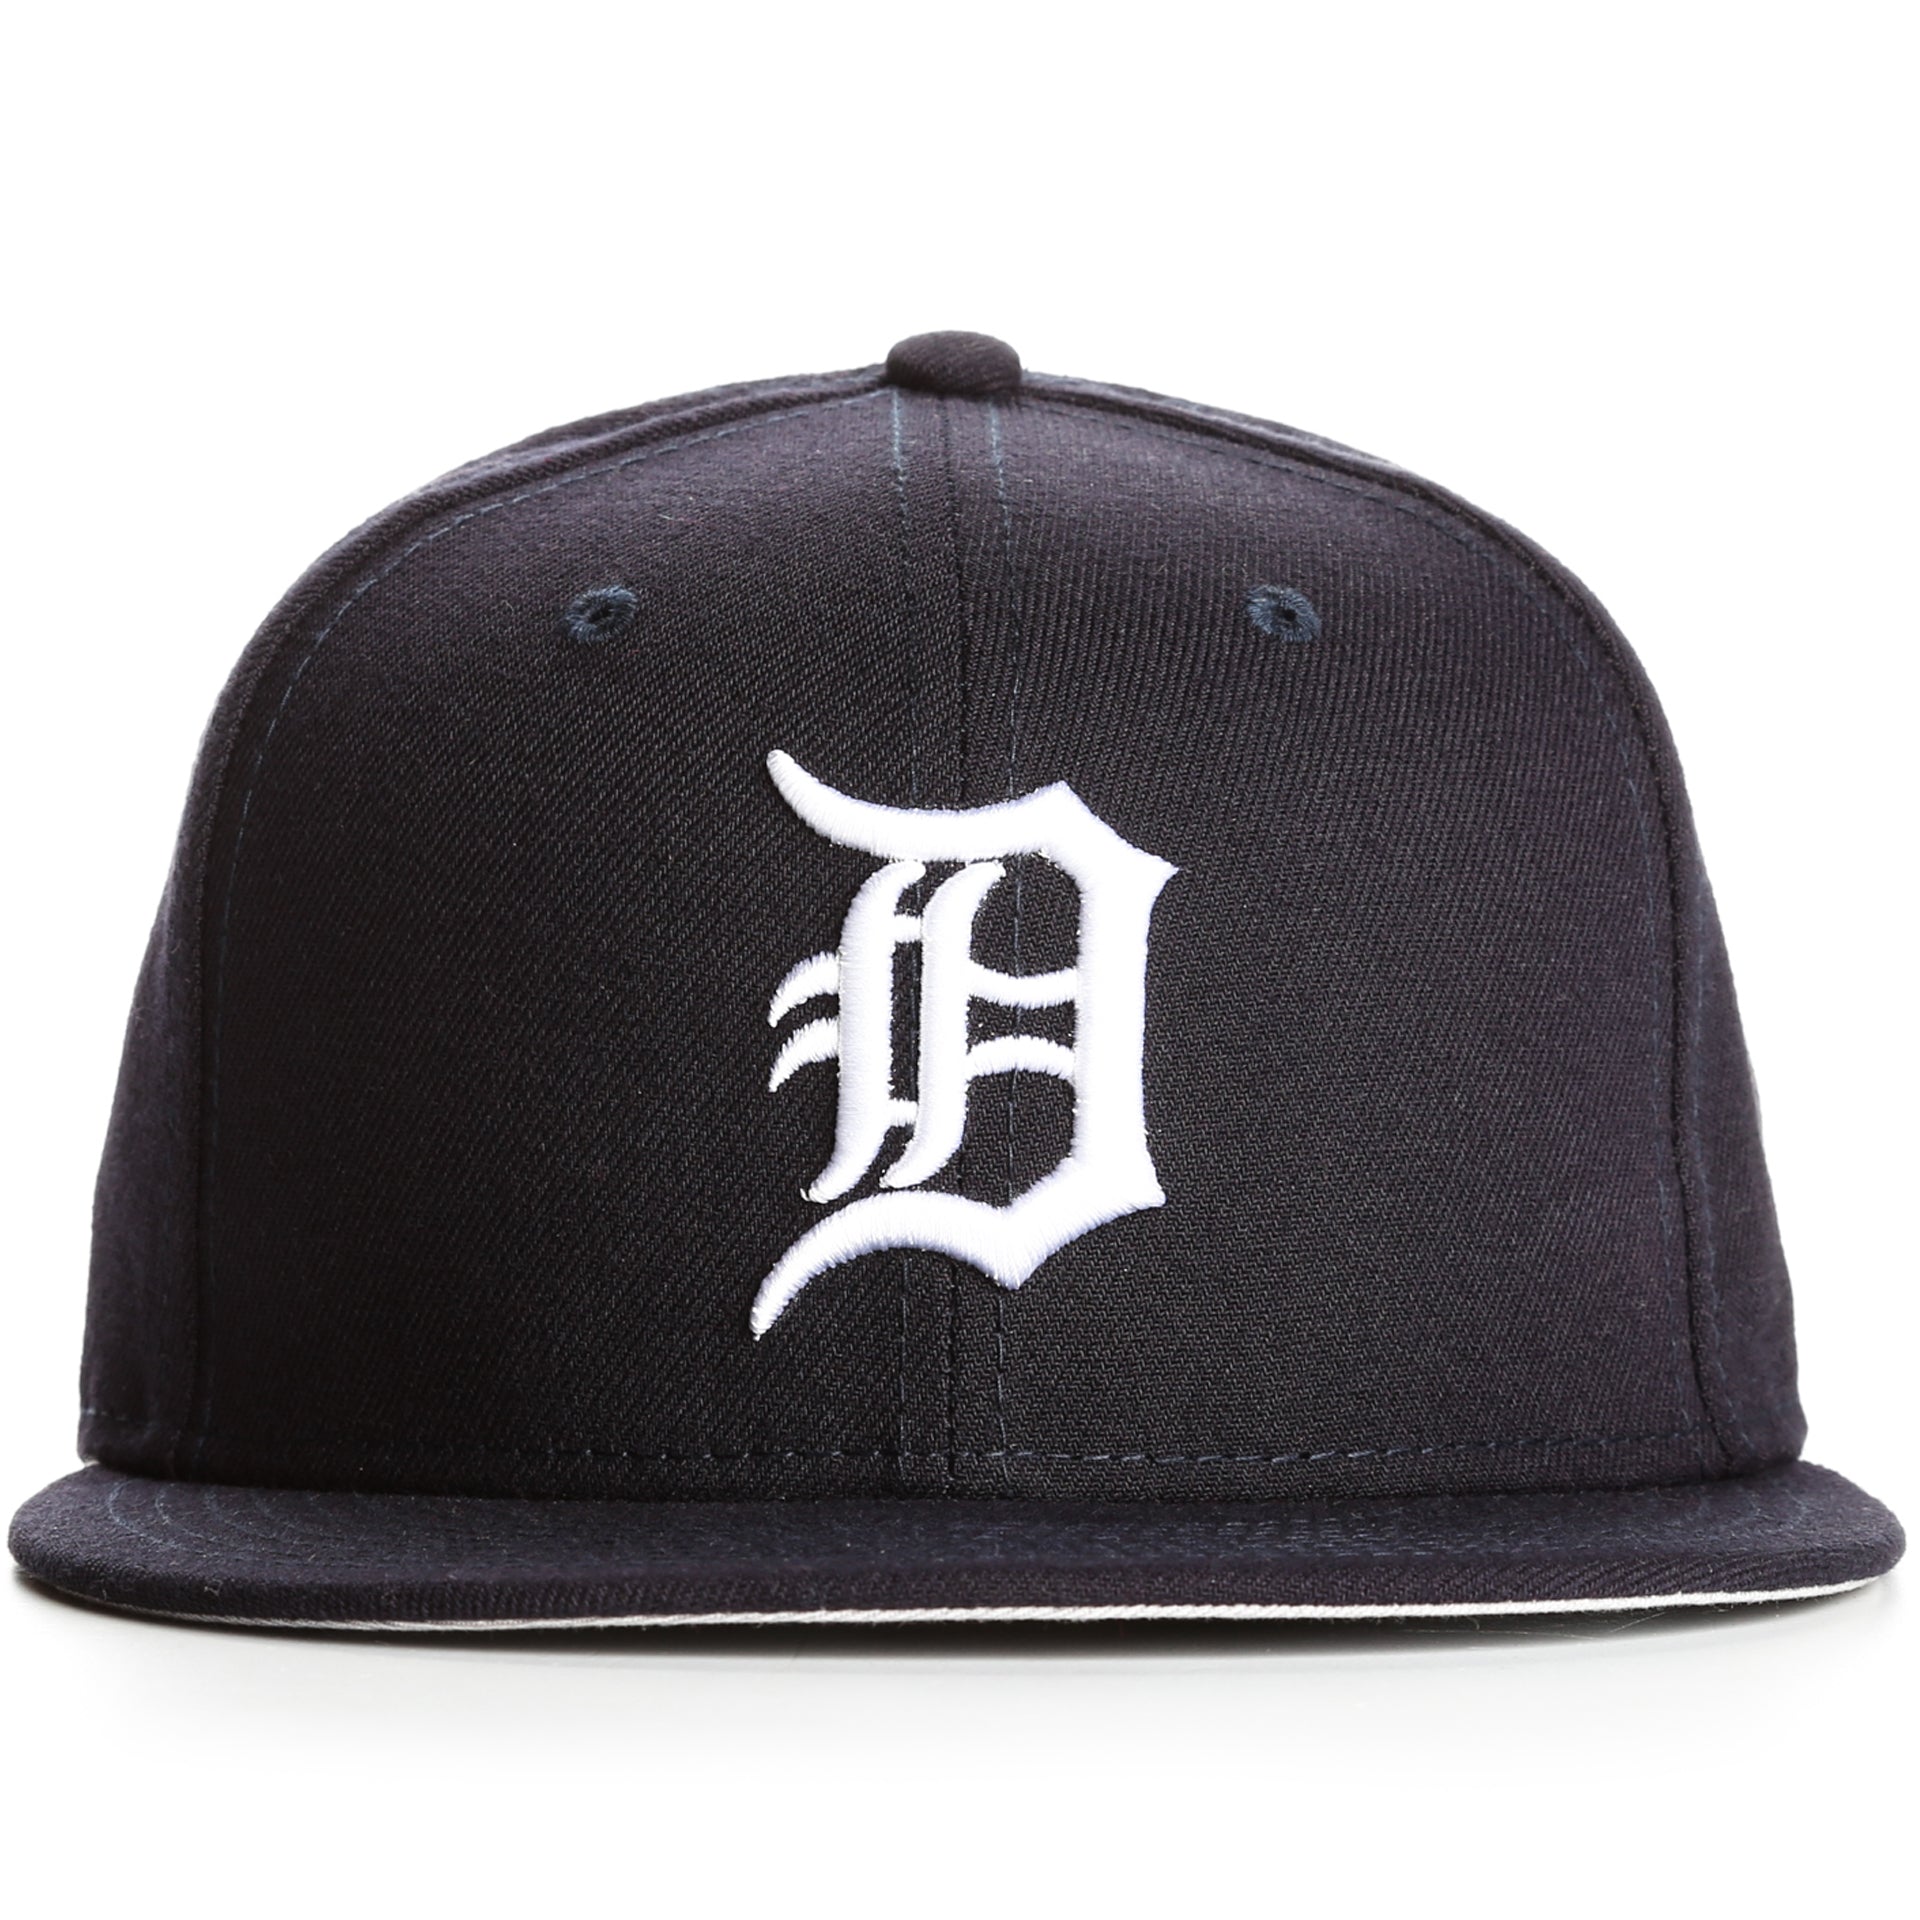 New Era 59Fifty League Basic Fitted Cap - Detroit Tigers/Black - New Star